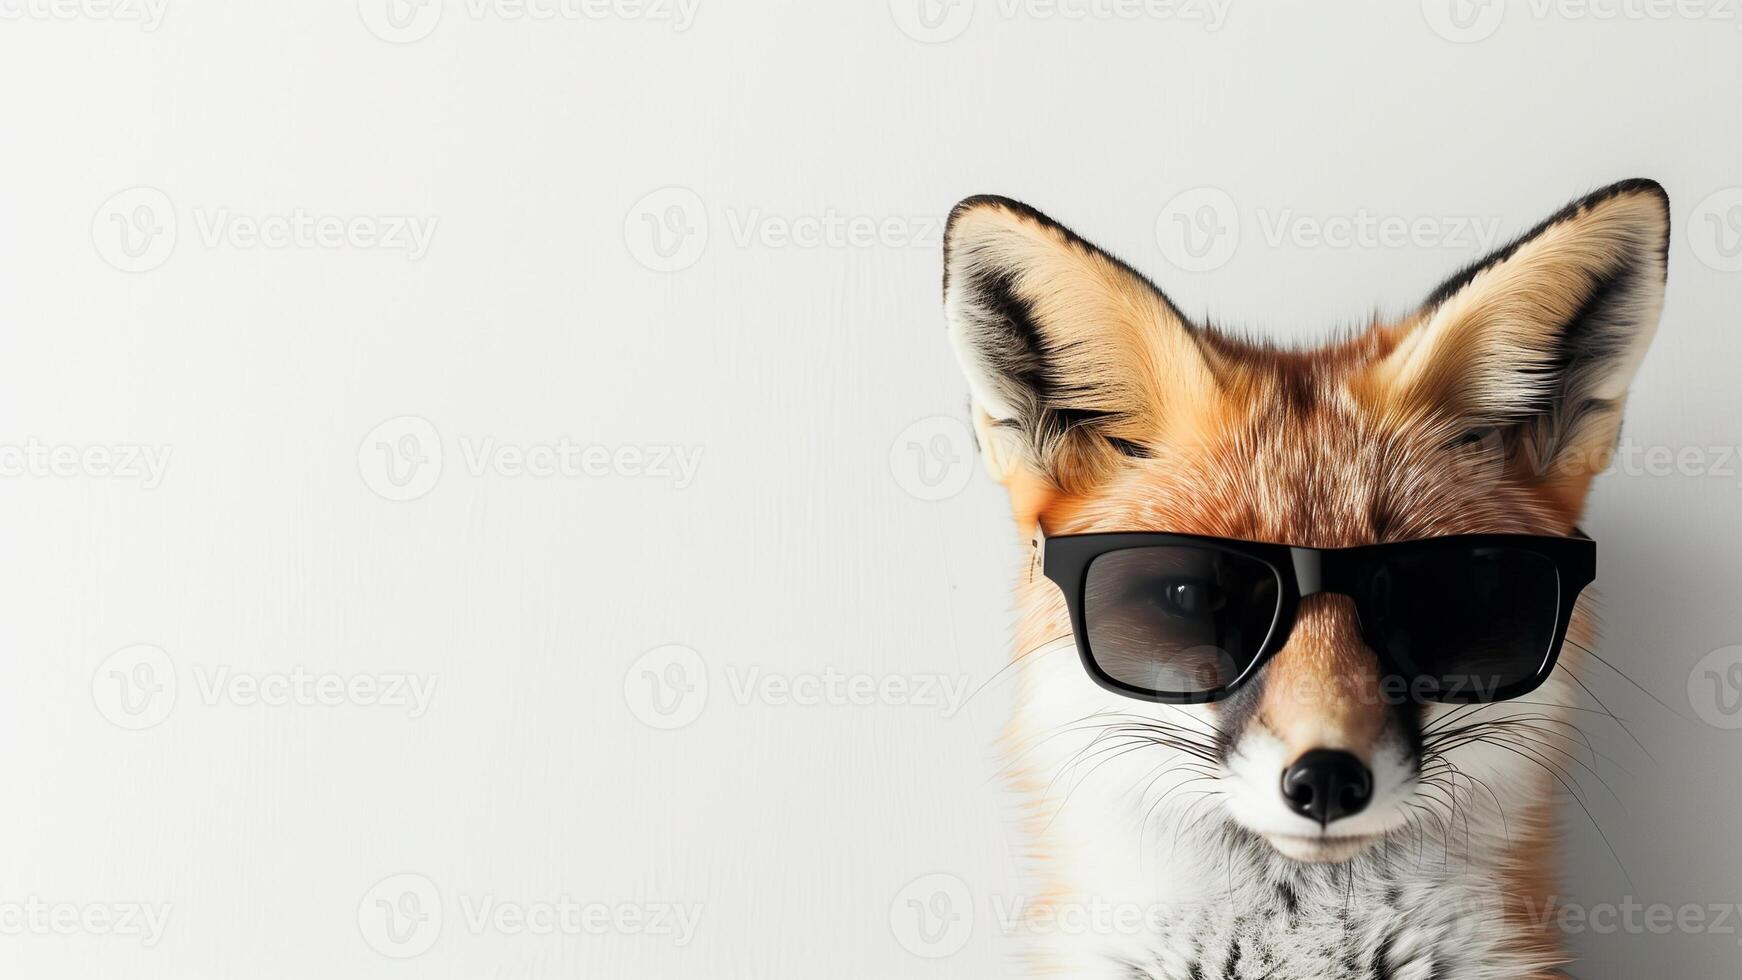 red fox wearing sunglasses on white background with copy space close up photo